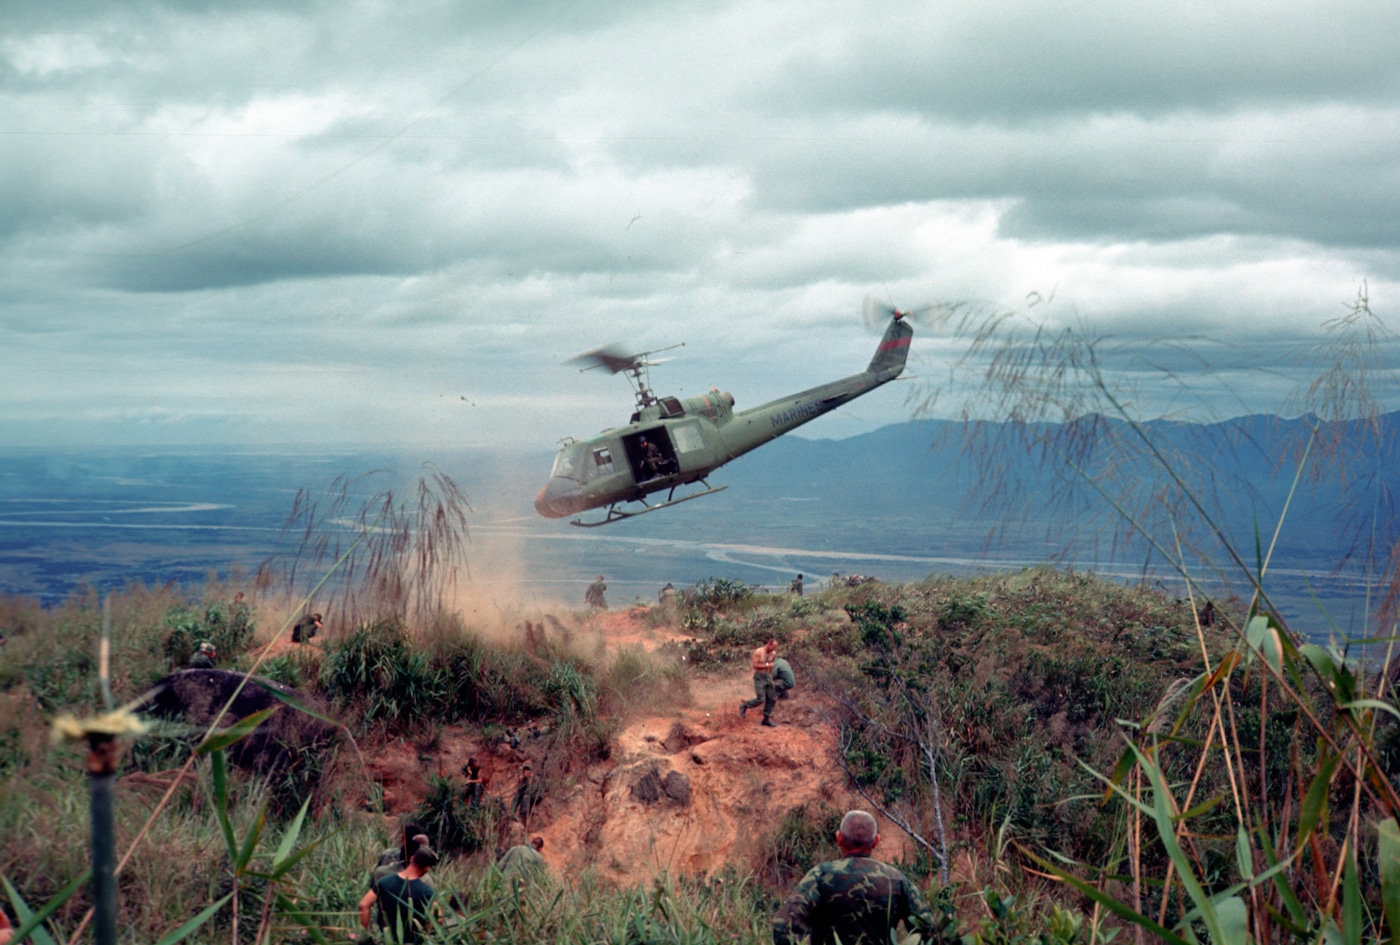 In this photograph, we see the most-produced version of the Iroquois military helicopter deliver ammunition, grenades and rations to United States Marines during Operation Oklahoma Hills during the Vietnam War. The helicopter used air mobility as its strength in supporting ground troops and could carry a large amount of munitions.